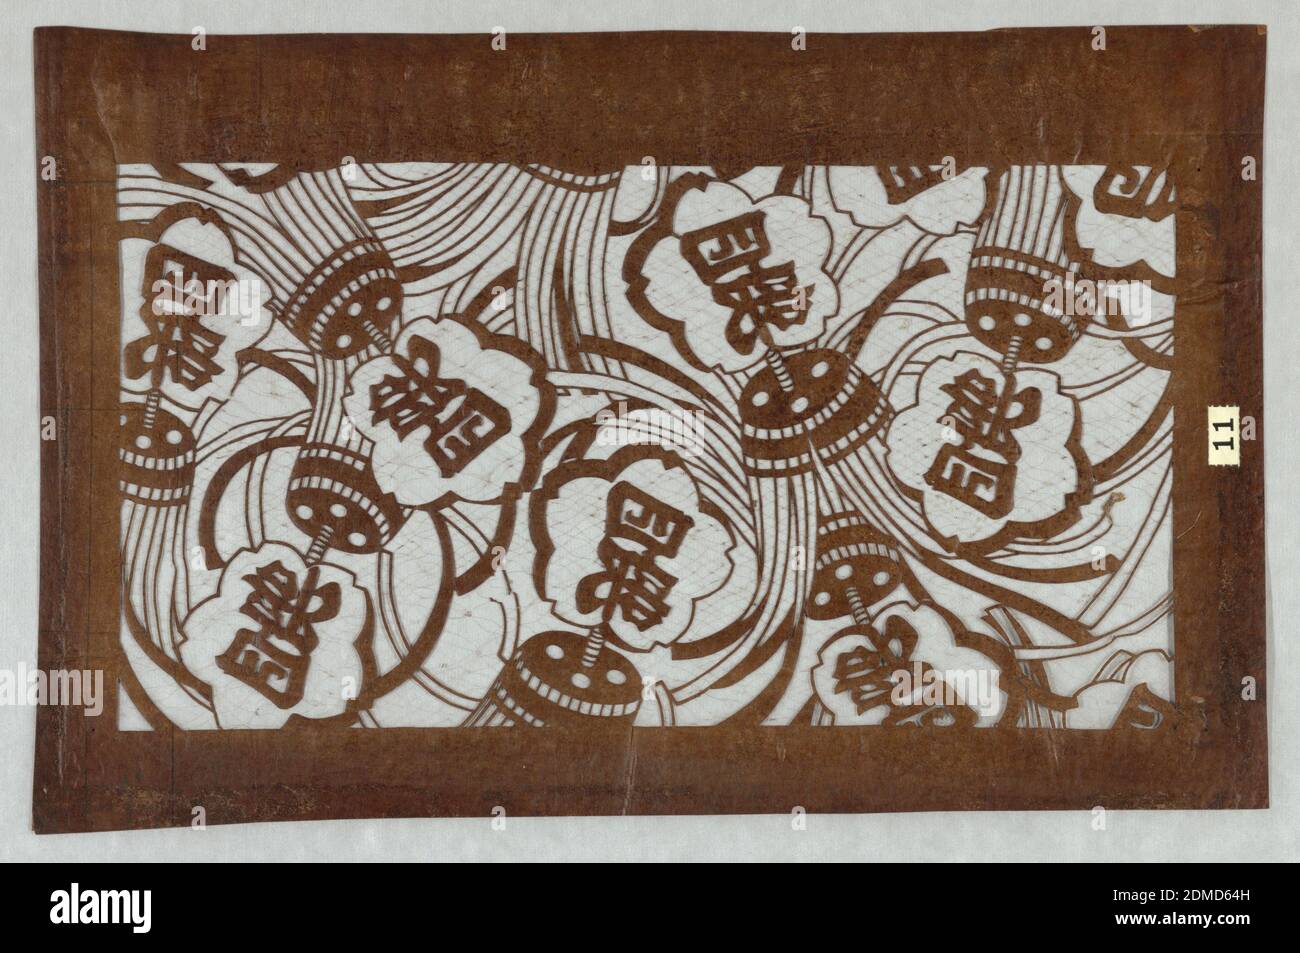 Matoi Motif, Mulberry paper (kozo washi) treated with fermented persimmon tannin (kakishibu), and silk threads (itoire), In Japan, firefighters would use a unit called a matoi to put out fires. Each firehouse would have a unique matoi. This stencil represents team four. Edo is also known as the city of fires since houses were built from timber and paper. There were five hundred major fires known between 1951 and 1867. Matoi is a popular motif in ukiyo-e prints from the nineteenth century., Japan, mid 18th - early 19th century, textile designs, Katagami, Katagami Stock Photo